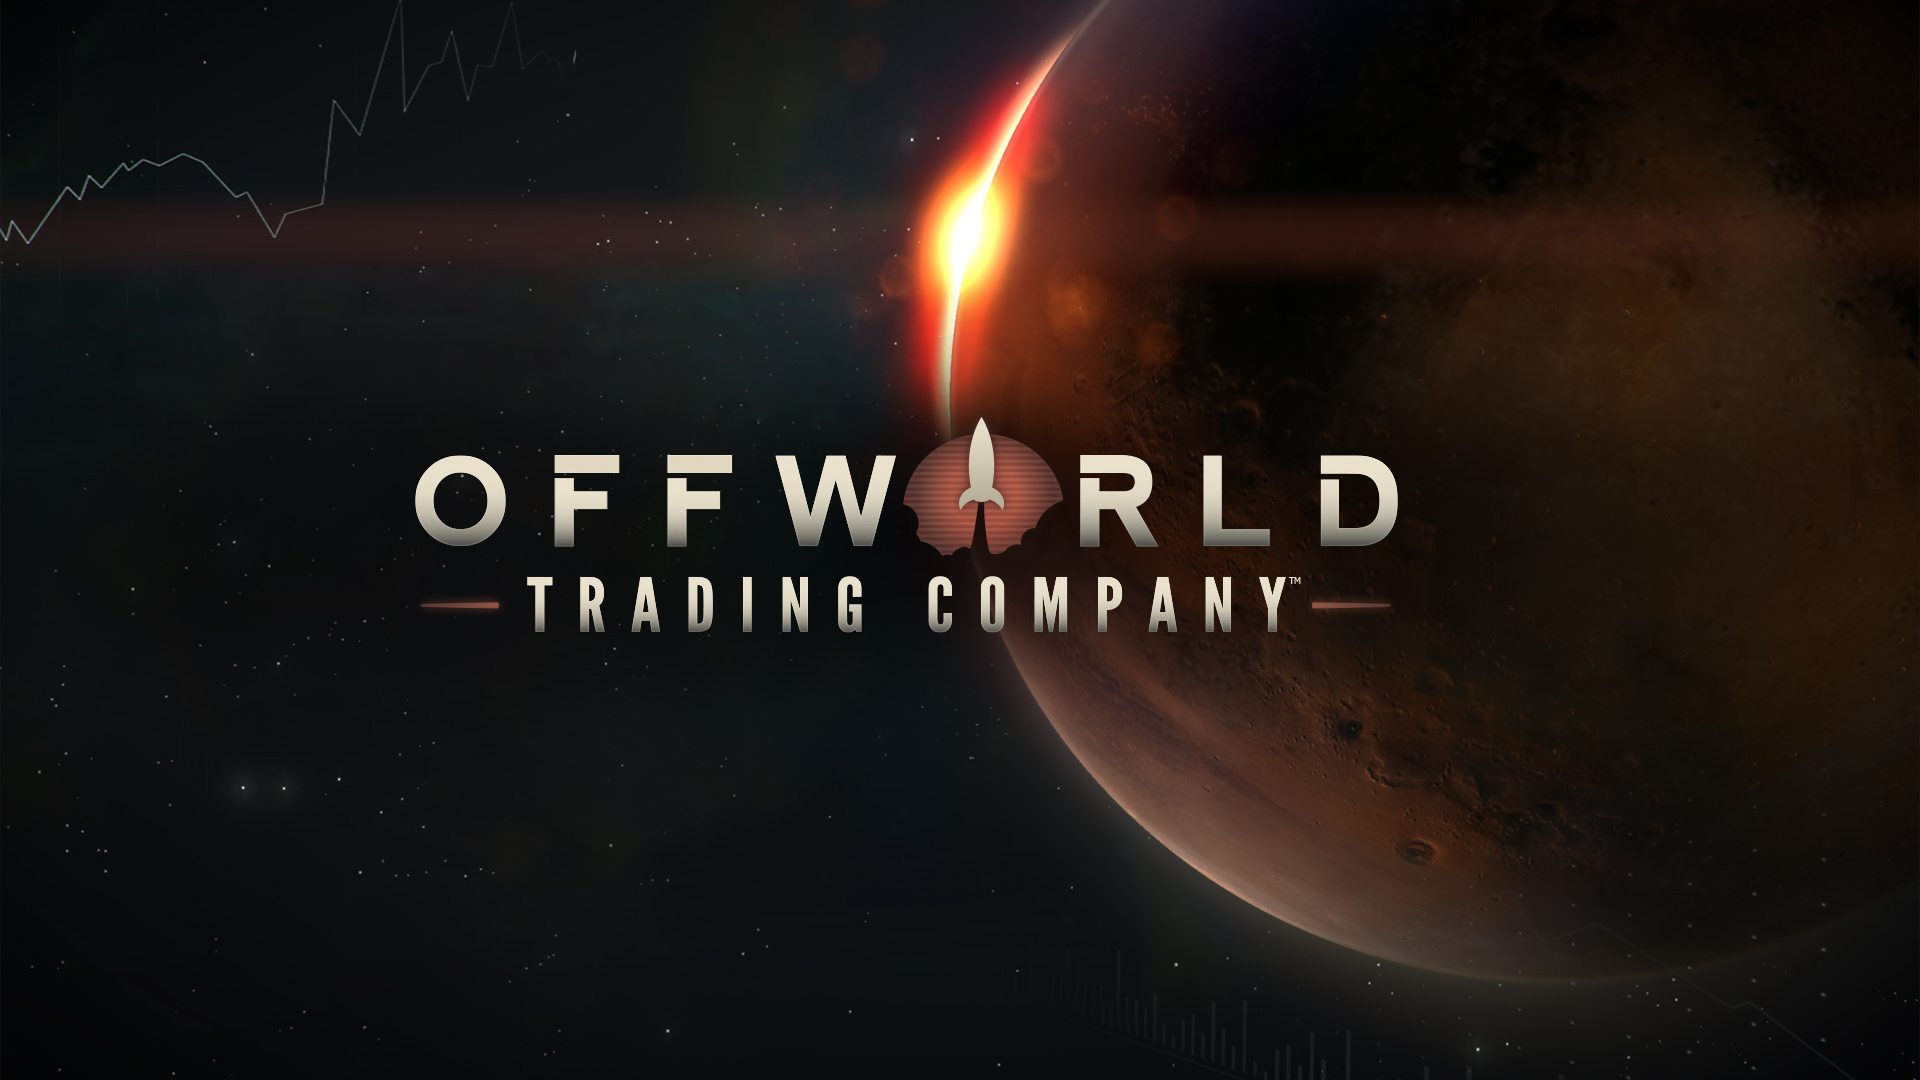 Offworld Trading Company Early Release